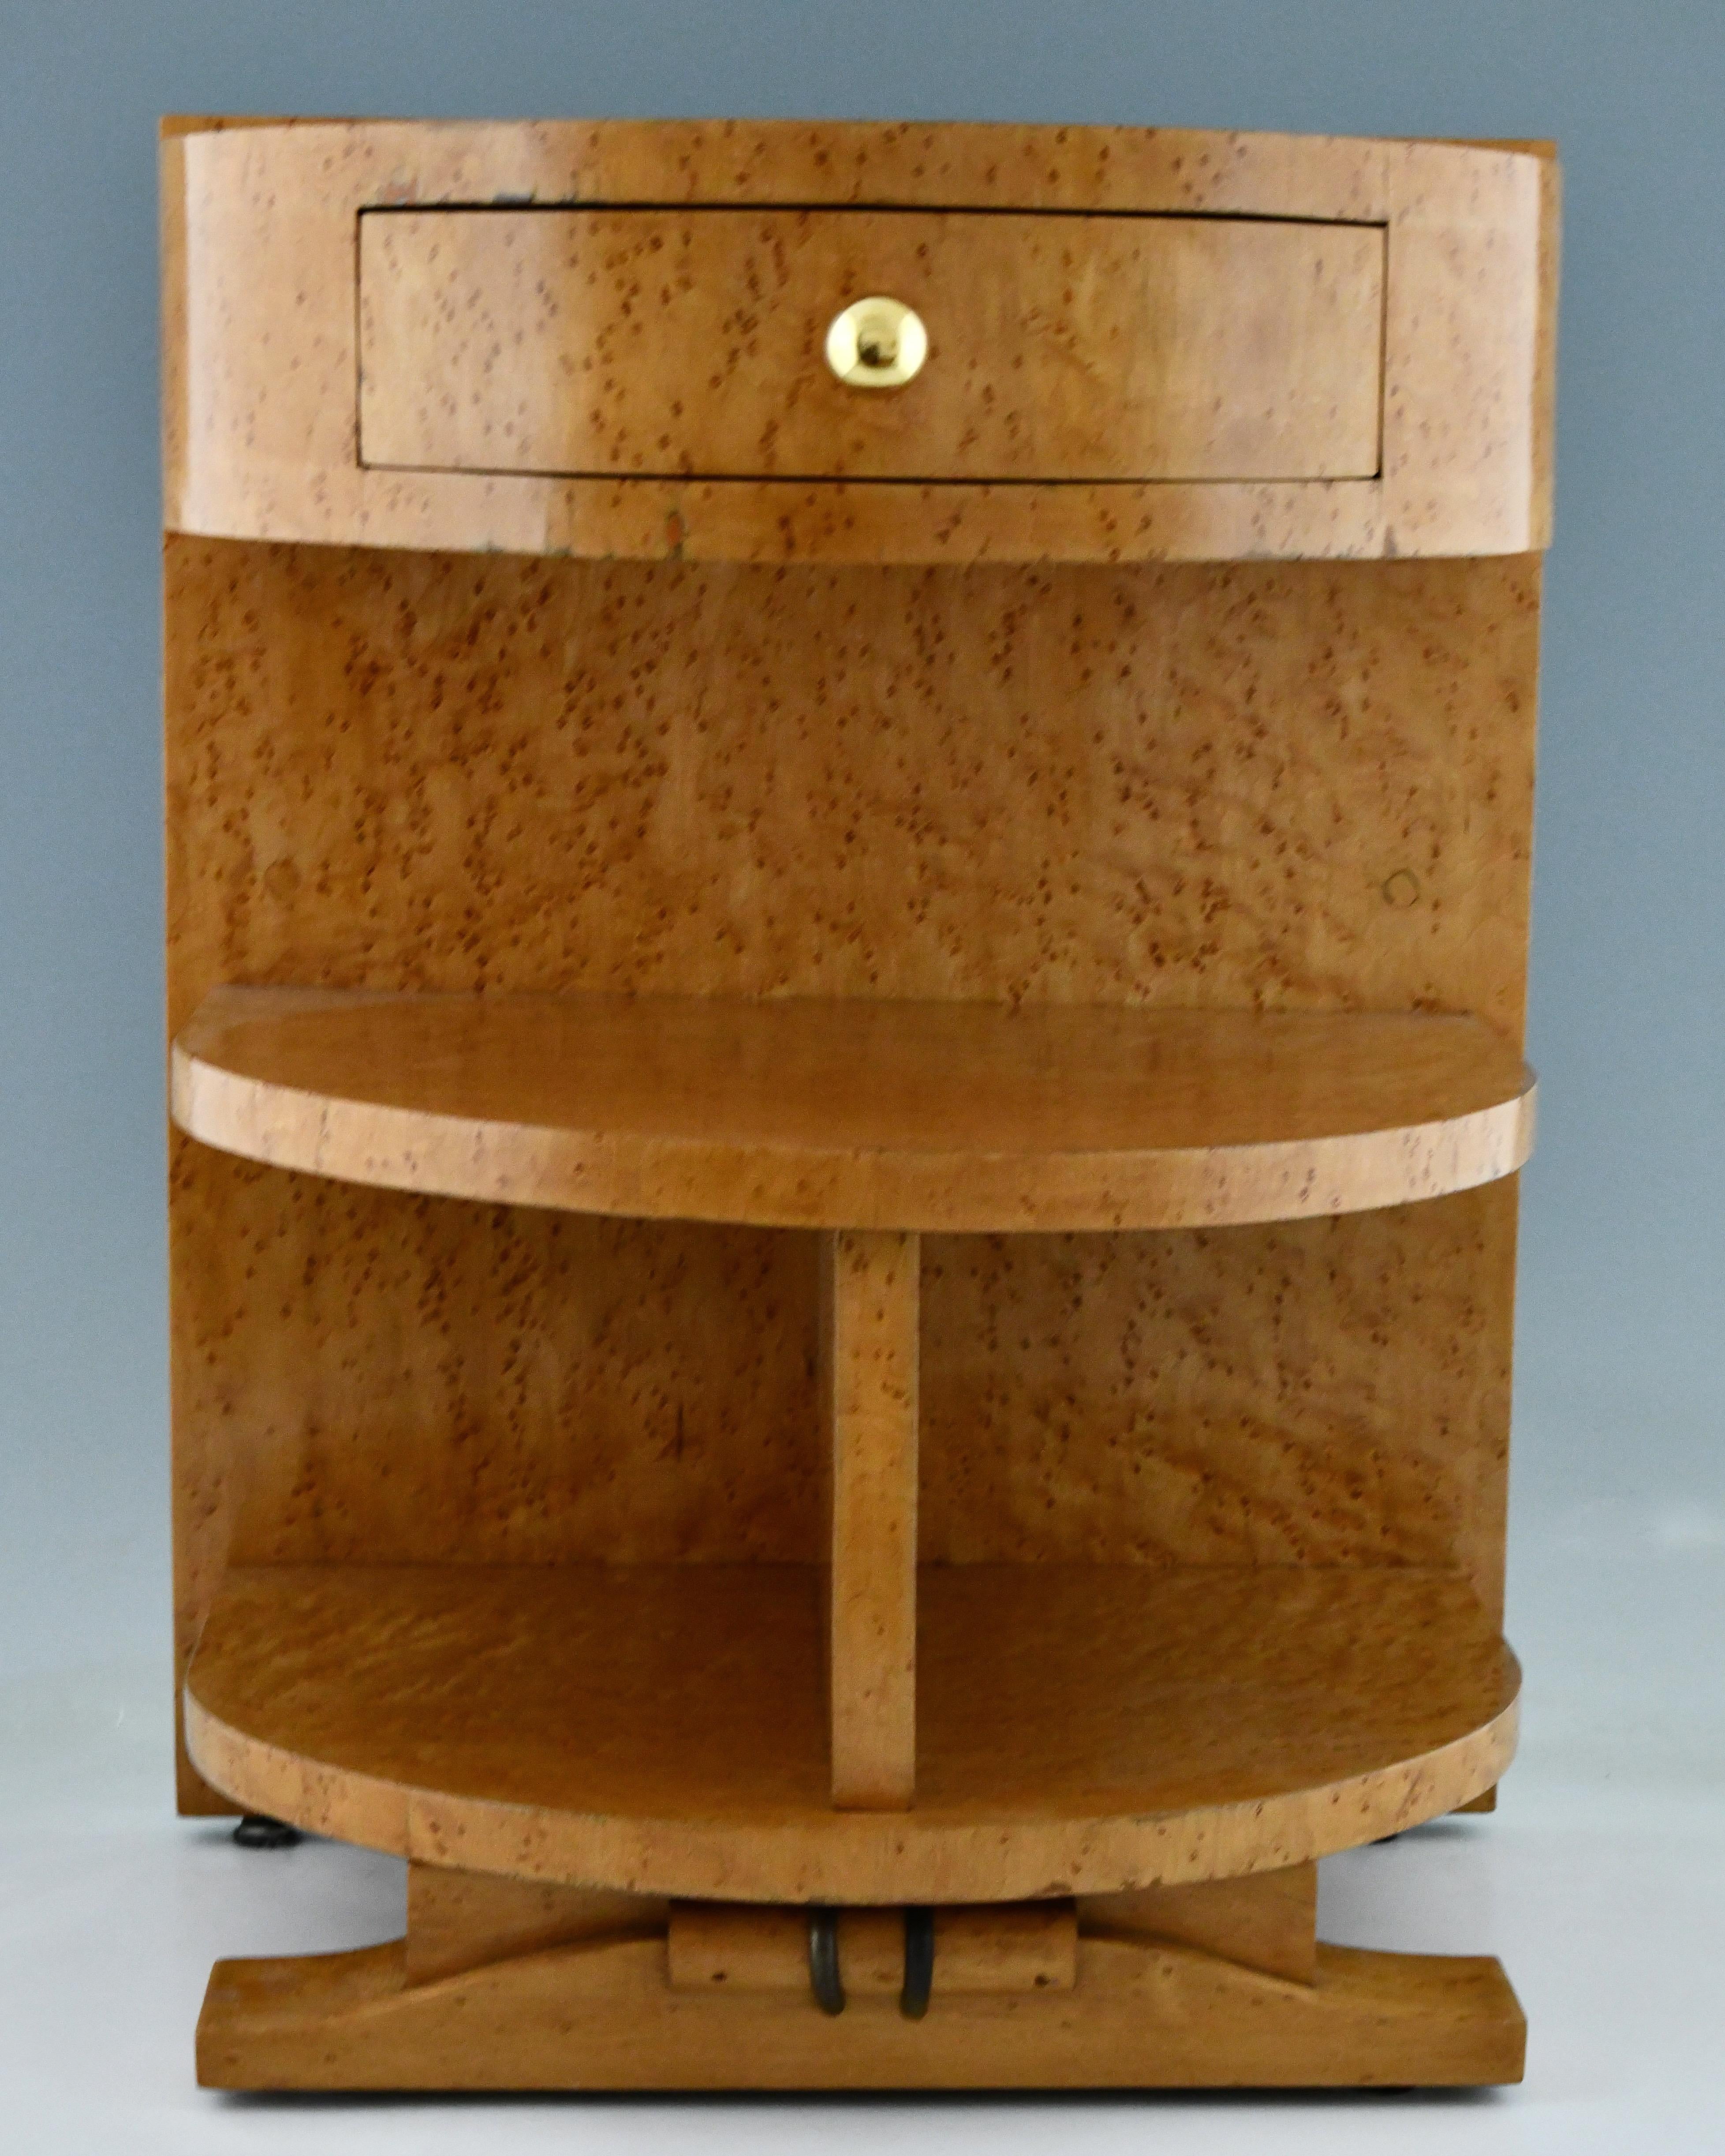 Pair of Art Deco semi circle bedside tables or night stands, birdseye maple veneer on wood. Open shelve and single drawer. One with a door. Brass handles and details. France, 1930.